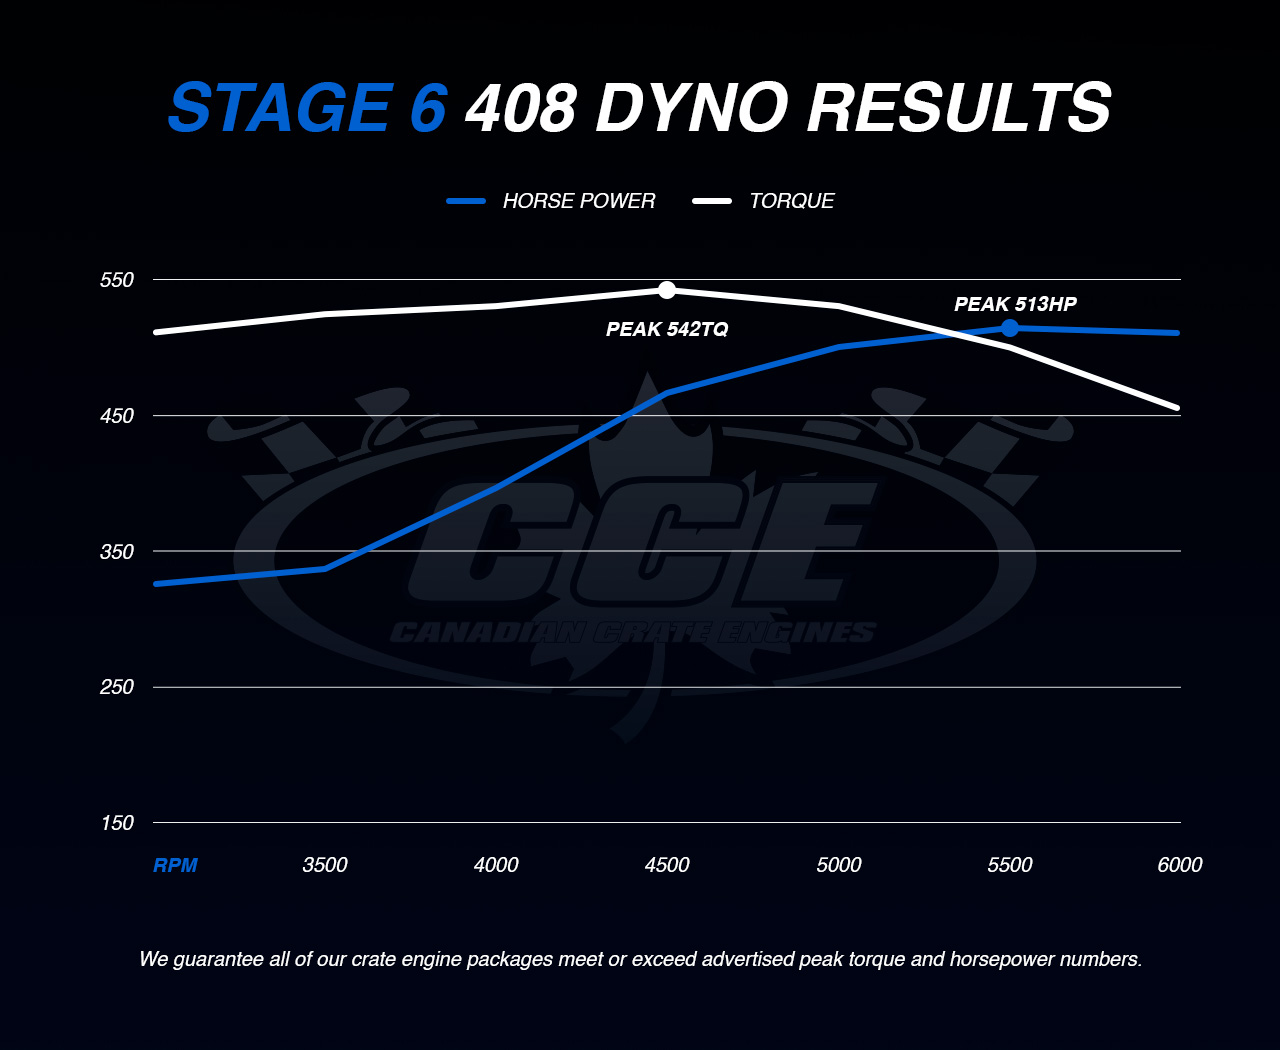 Dyno Graph Results for Ford Stage 6 showing peak torque of 542TQ and peak horsepower of 513HP